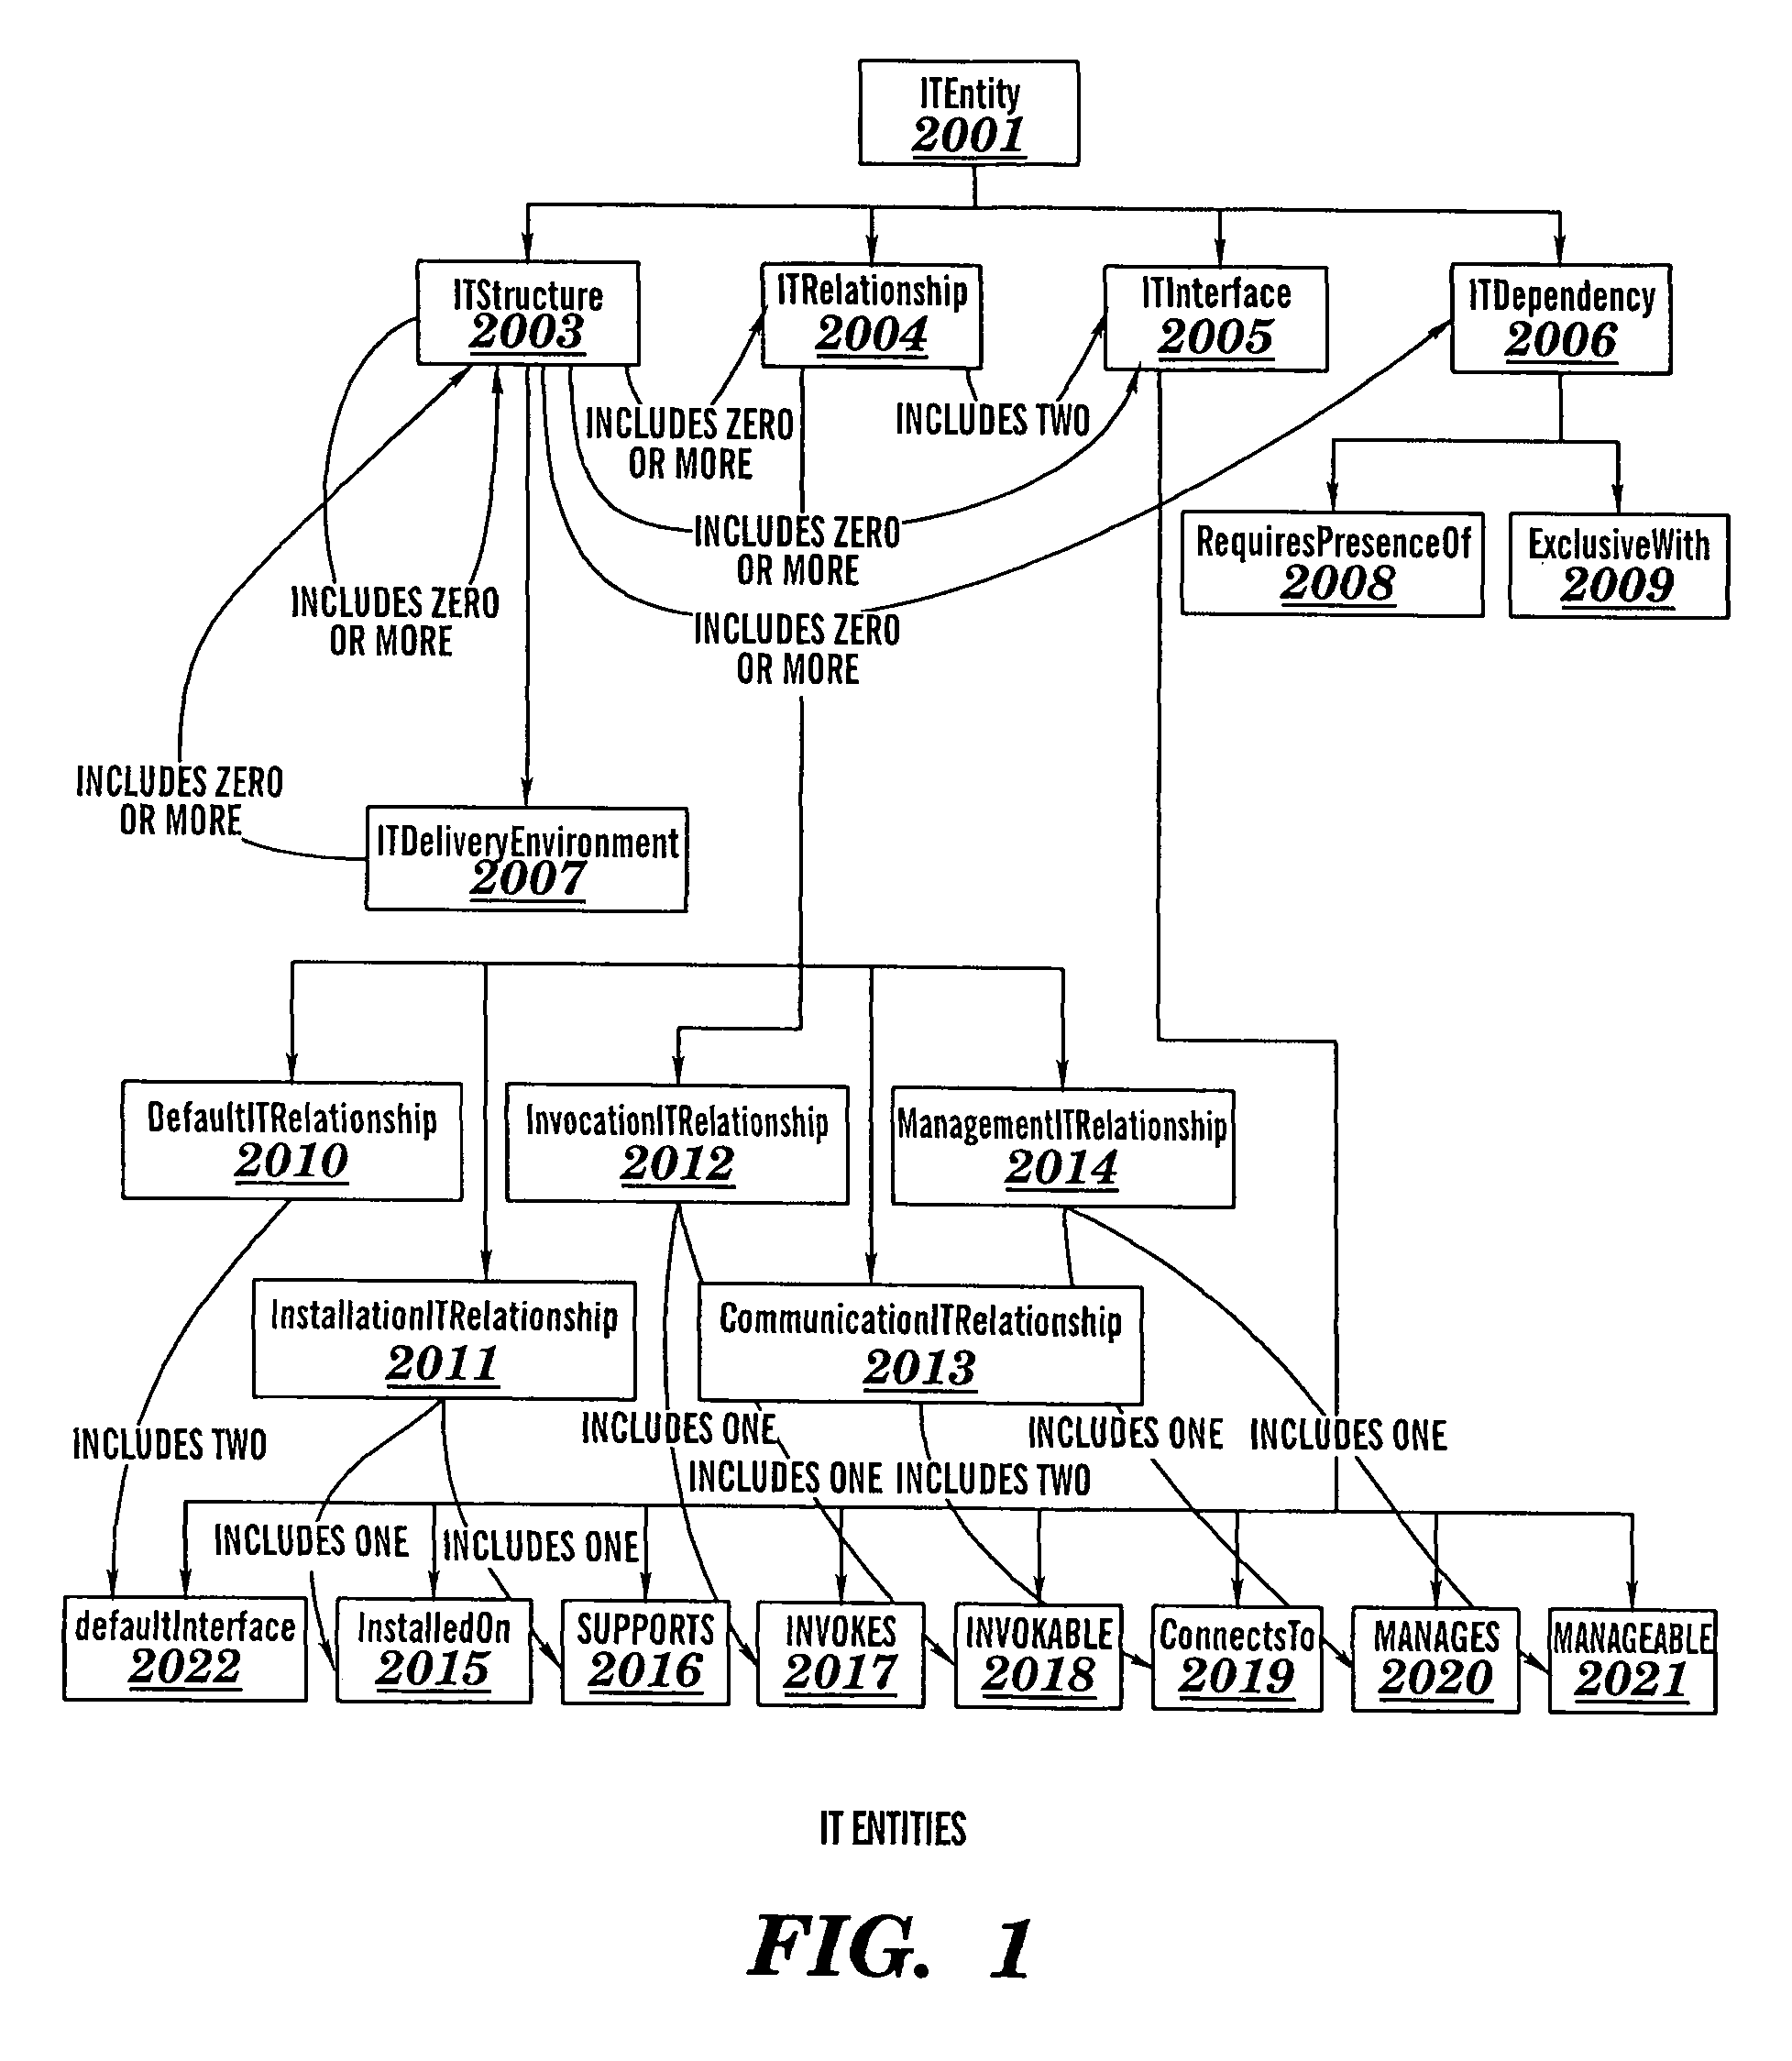 Automated verification of correctness of aspects of an information technology system